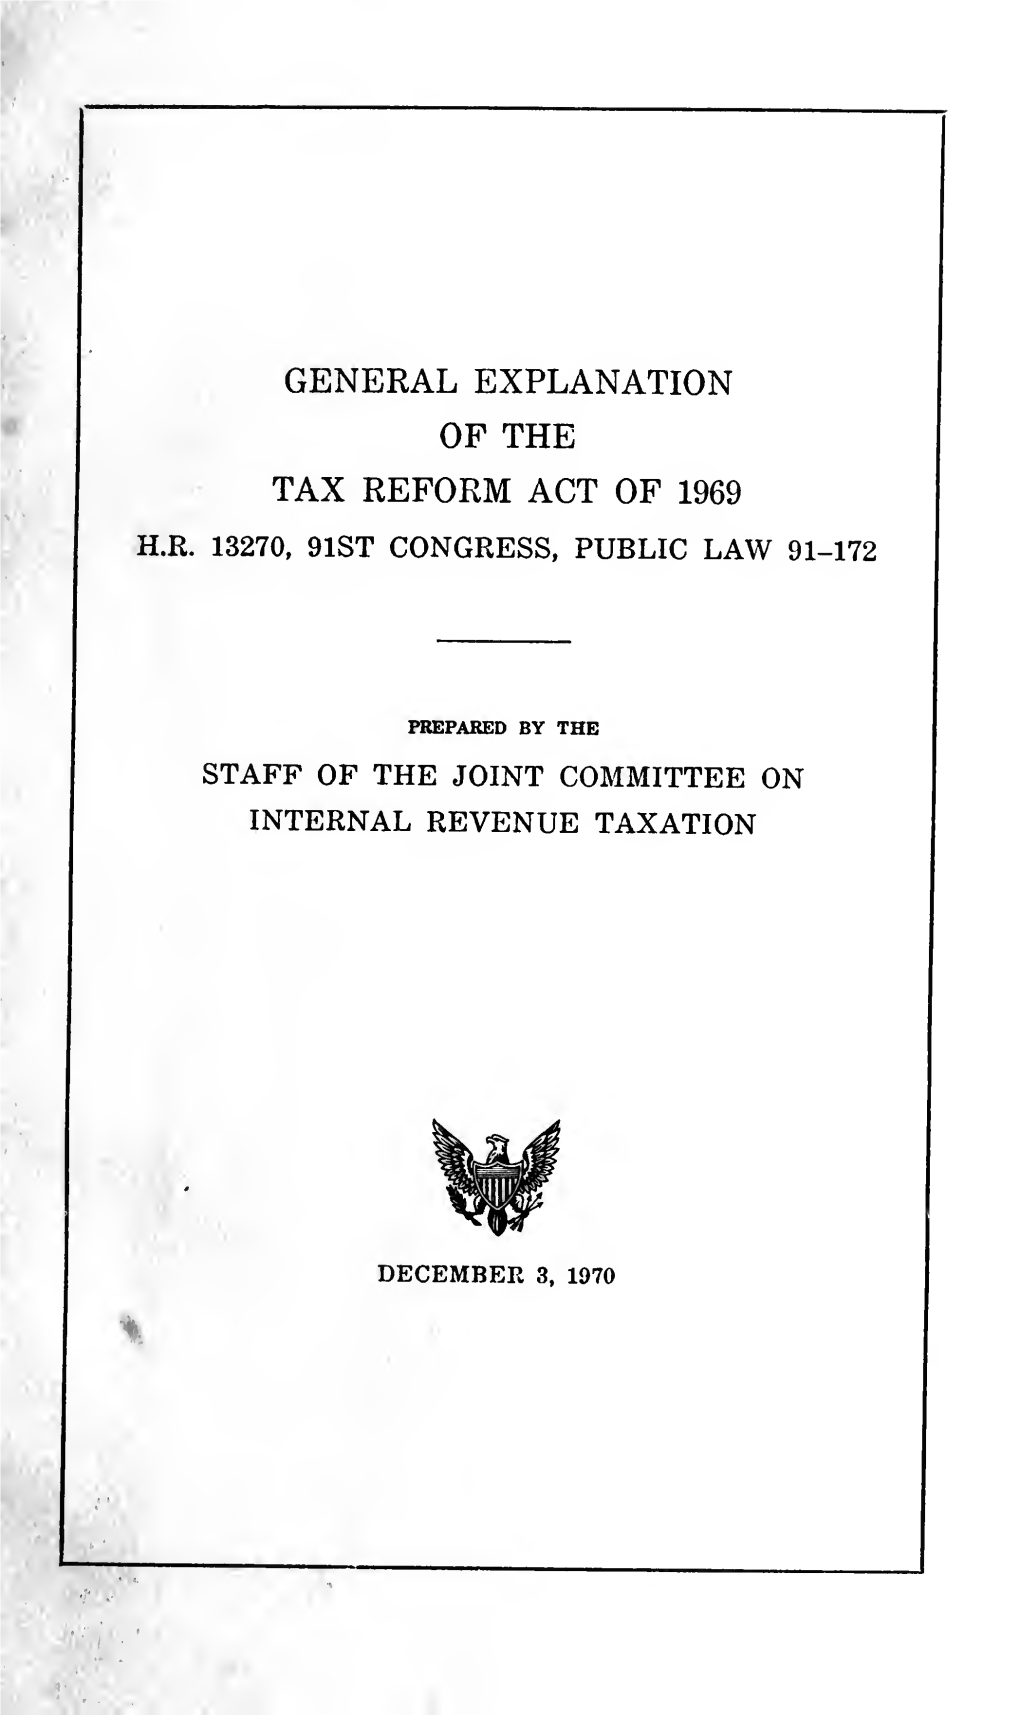 General Explanation of the Tax Reform Act of 1969